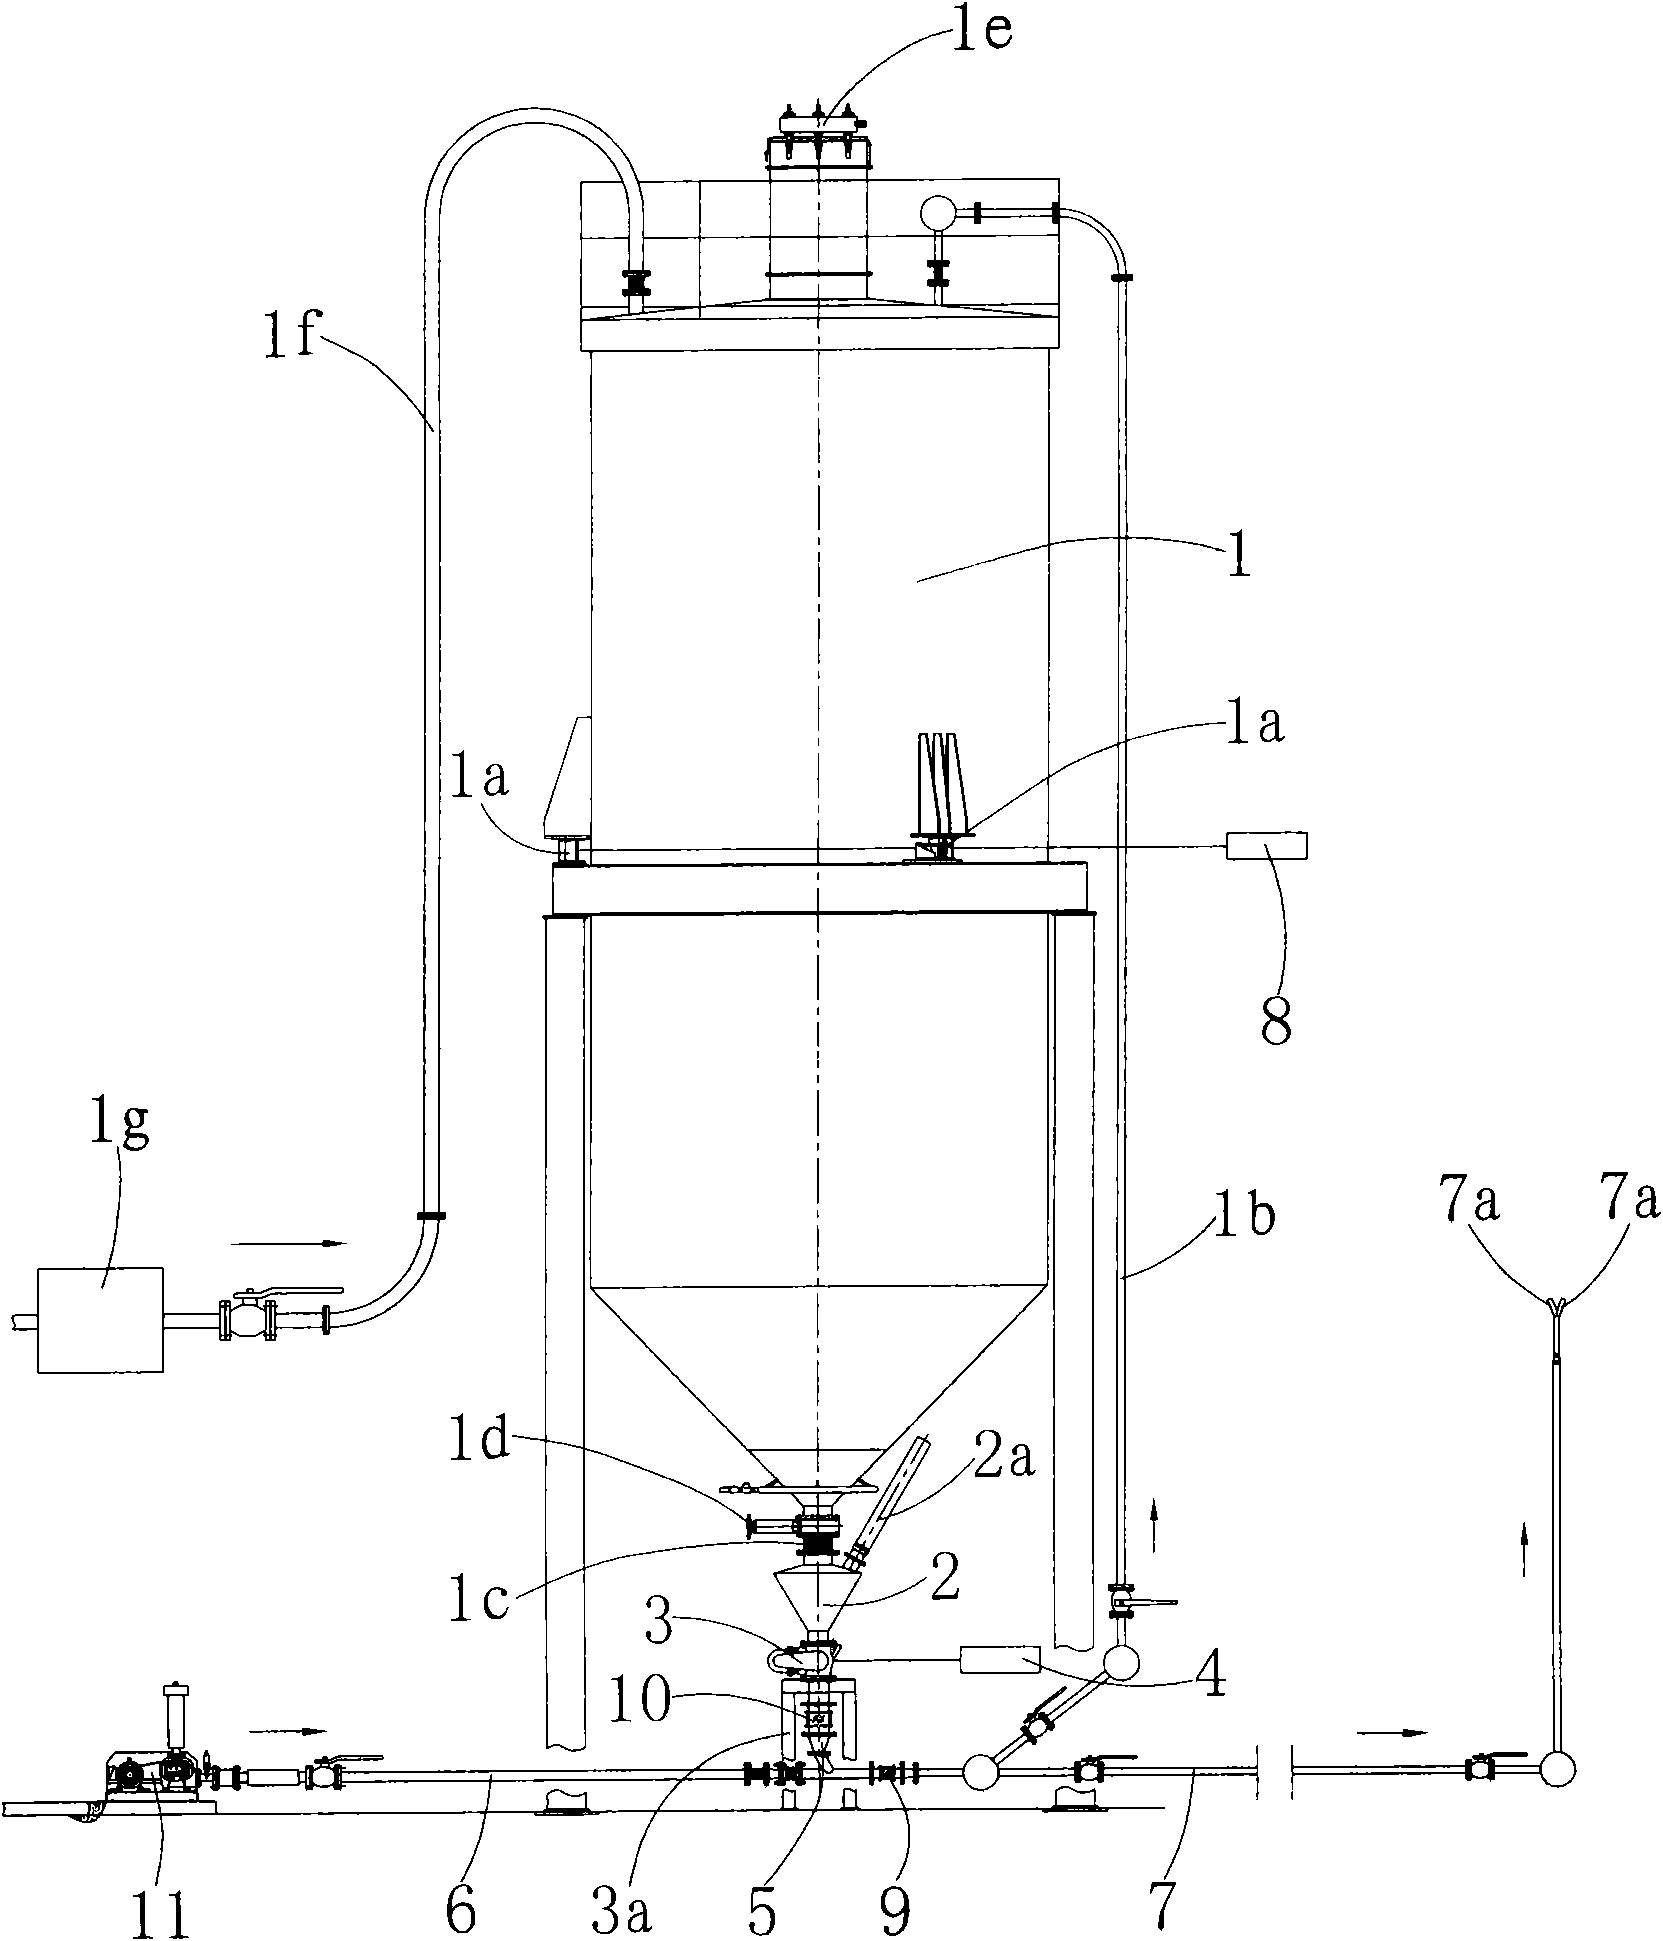 Petroleum coke powder combustion transporting device for improved industrial furnace